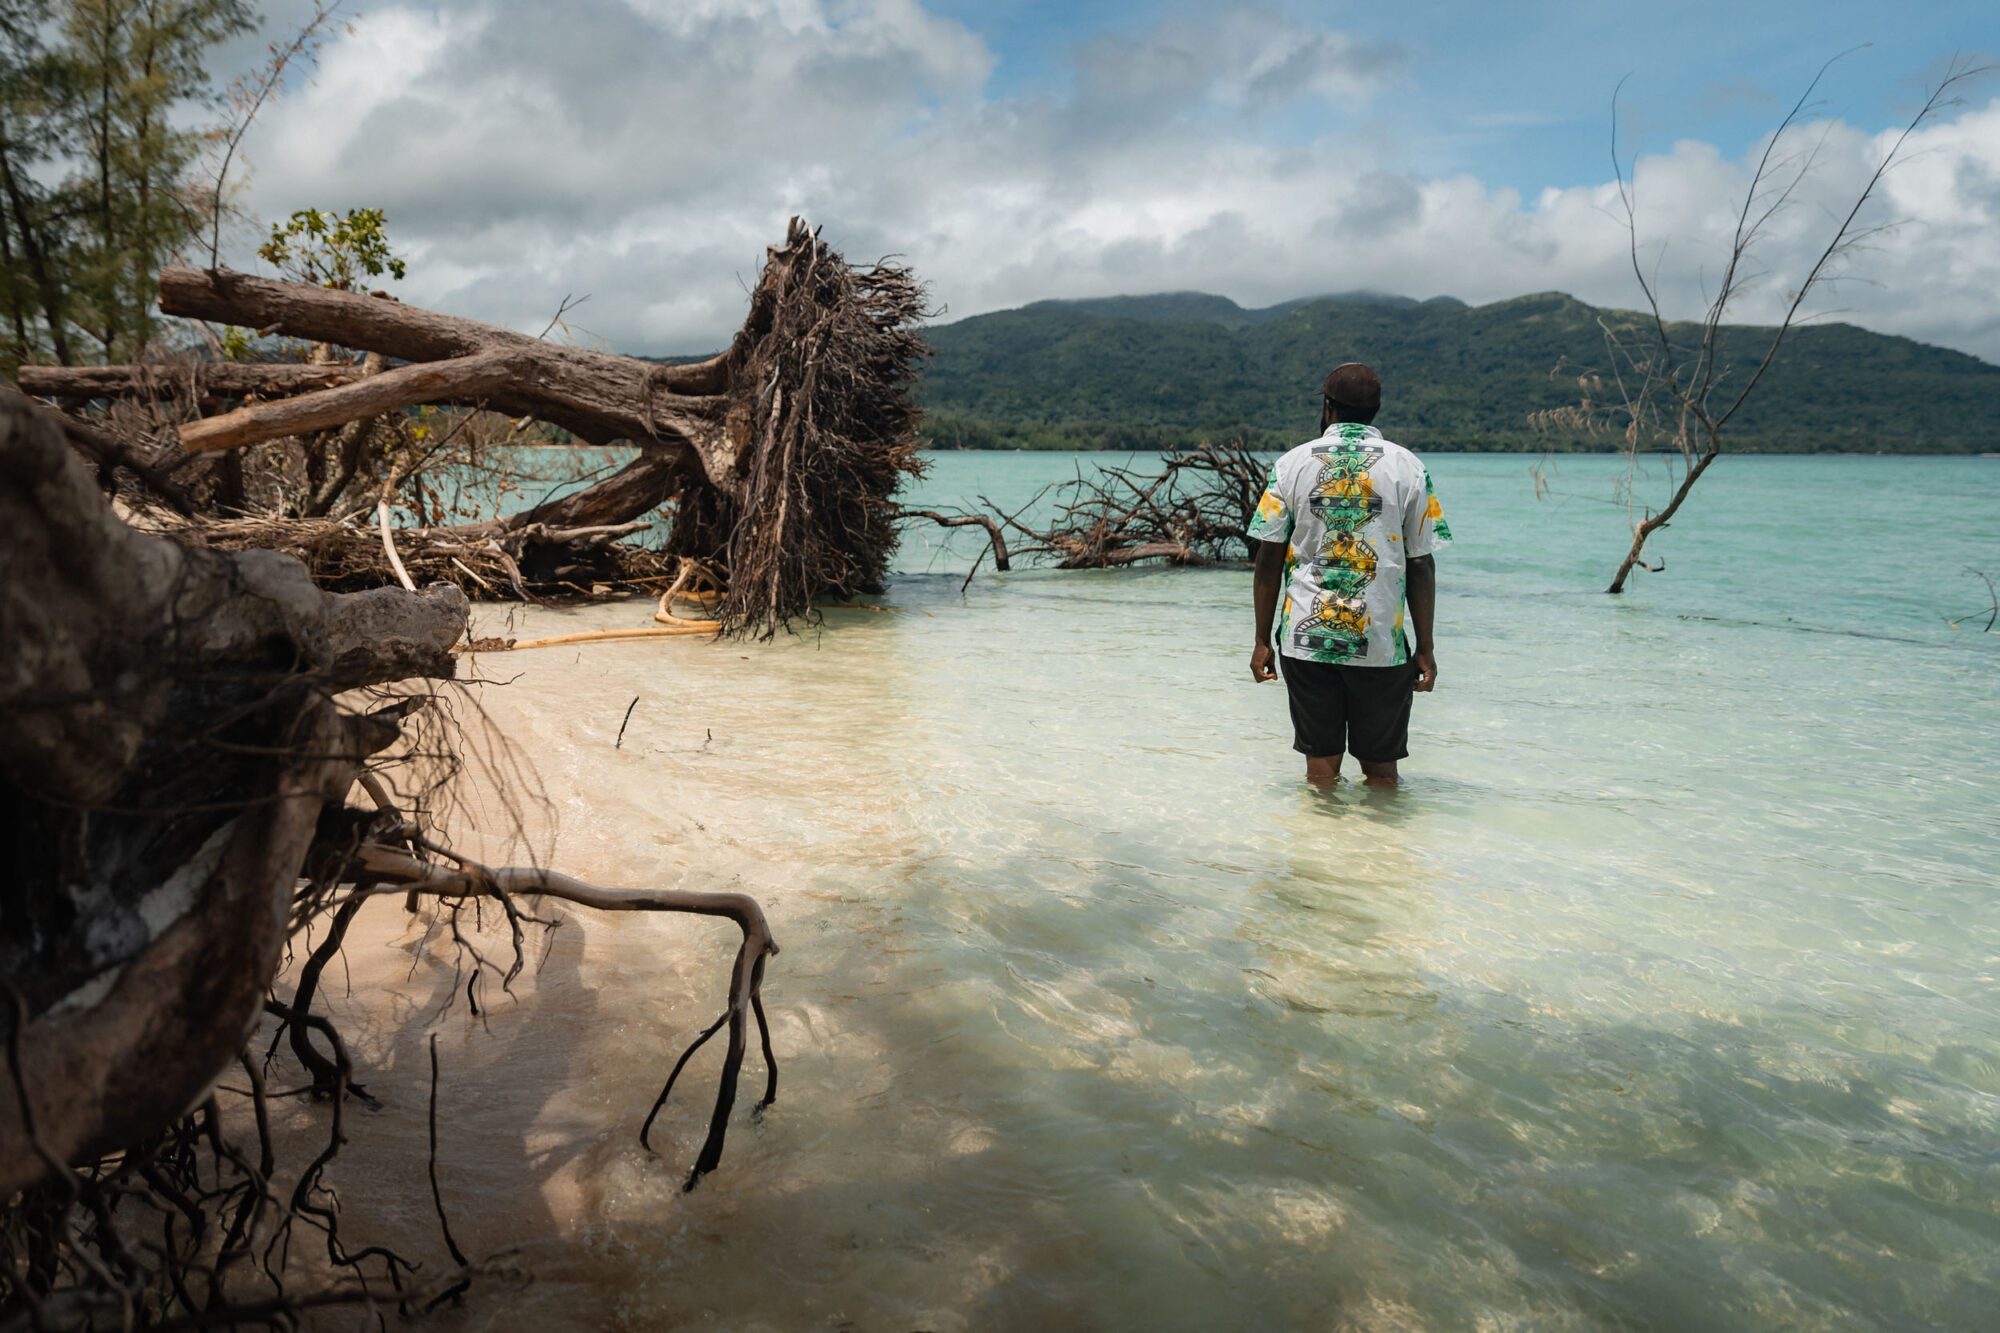 A man in a colourful patterned shirt stands at the shore of a Crystal clear light bluey-green sea, water up to his knees. A couple of fallen tree stumps are visible with the fallen trees on the right of the image. In the background is a mountain island